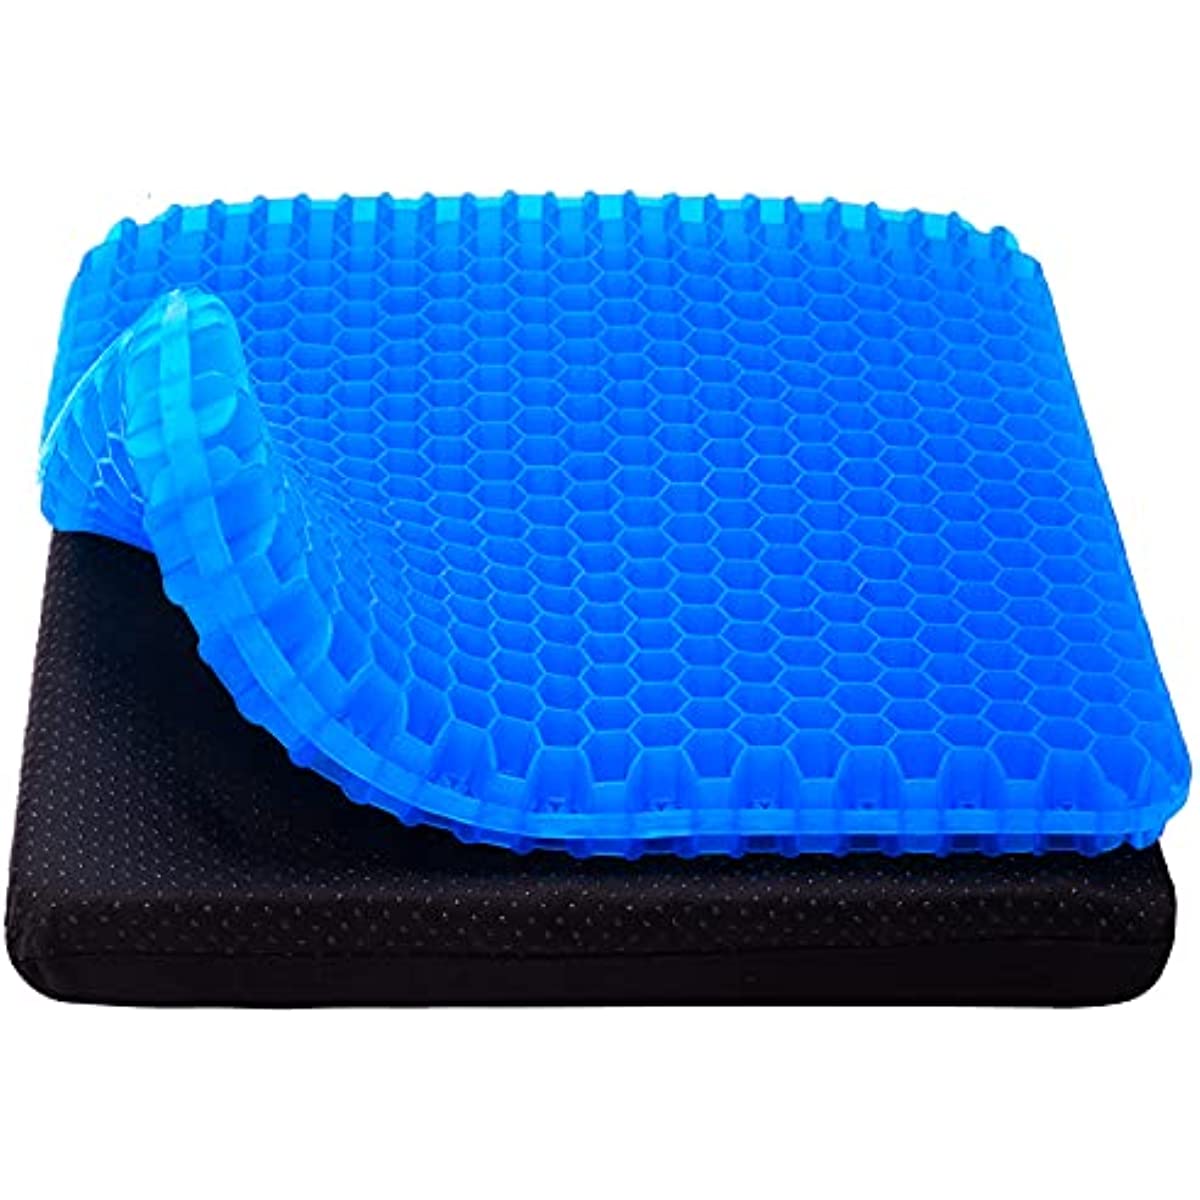 Gel Seat Cushion for Office Chair, Double Thick Royal Cushion for Long  Sitting with Non-Slip Cover, Breathable Honeycomb Chair Pads Absorbs  Pressure